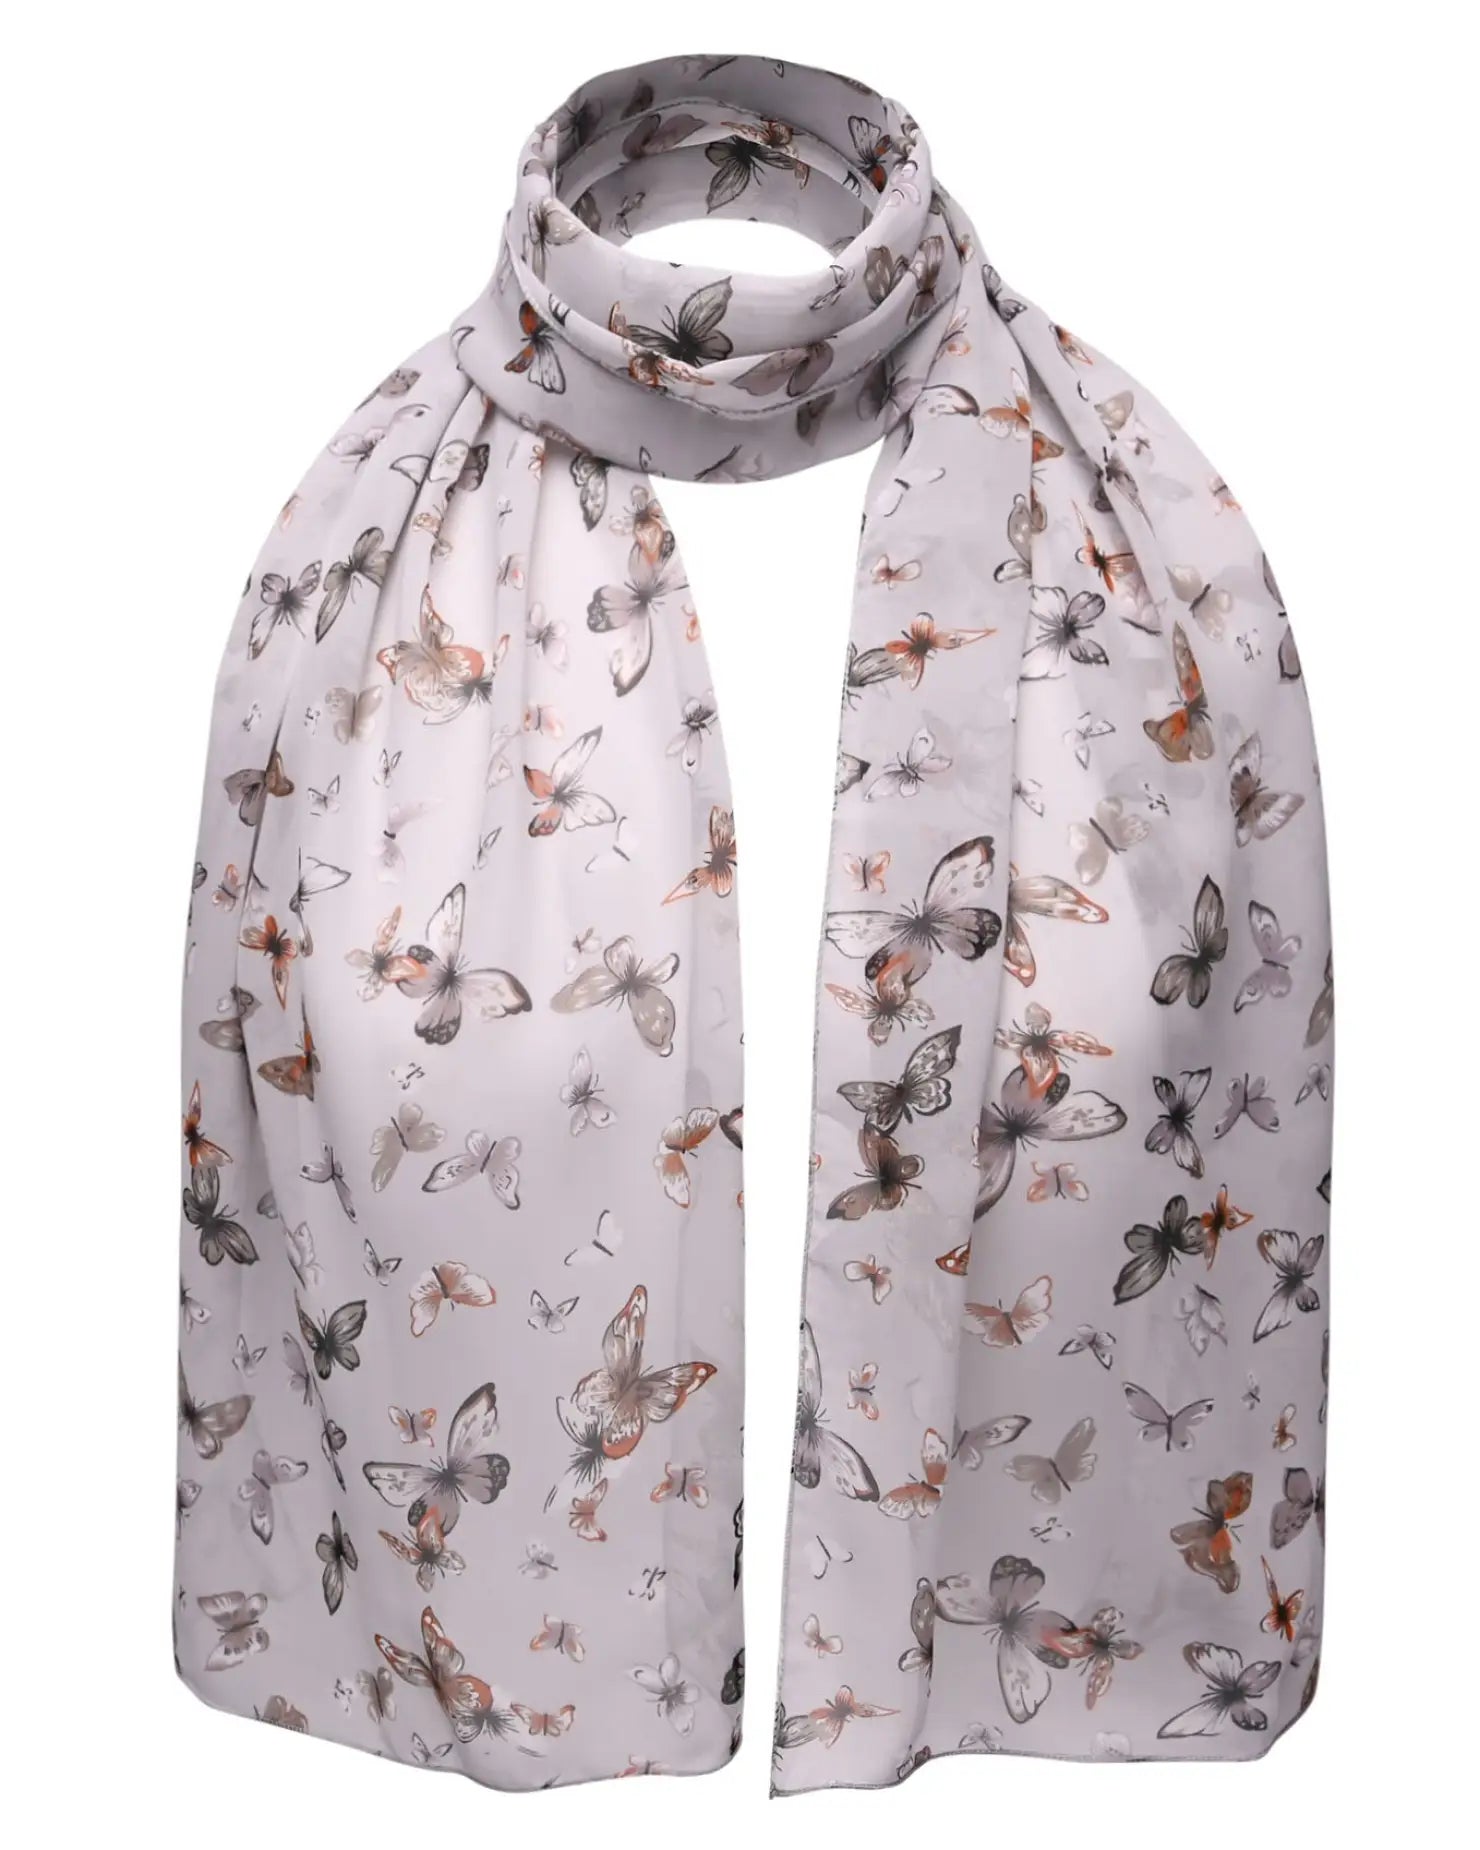 Butterfly print scarf: White scarf with exquisite butterfly pattern